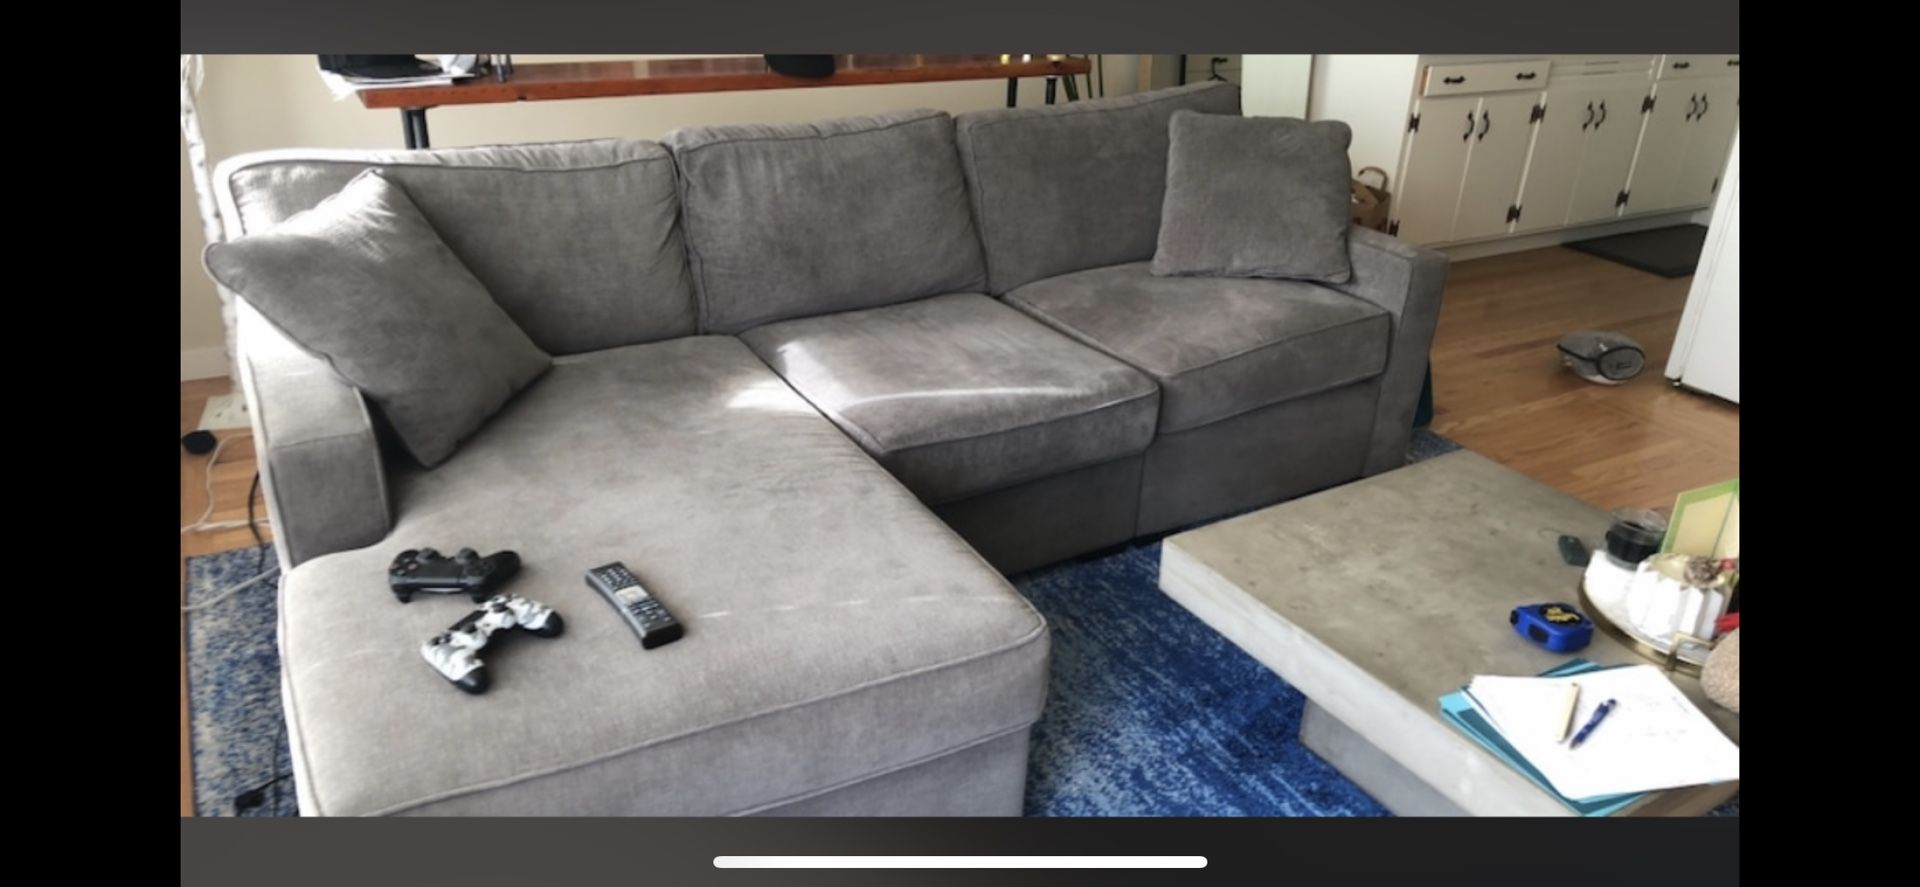 Sectional couch from Macy’s